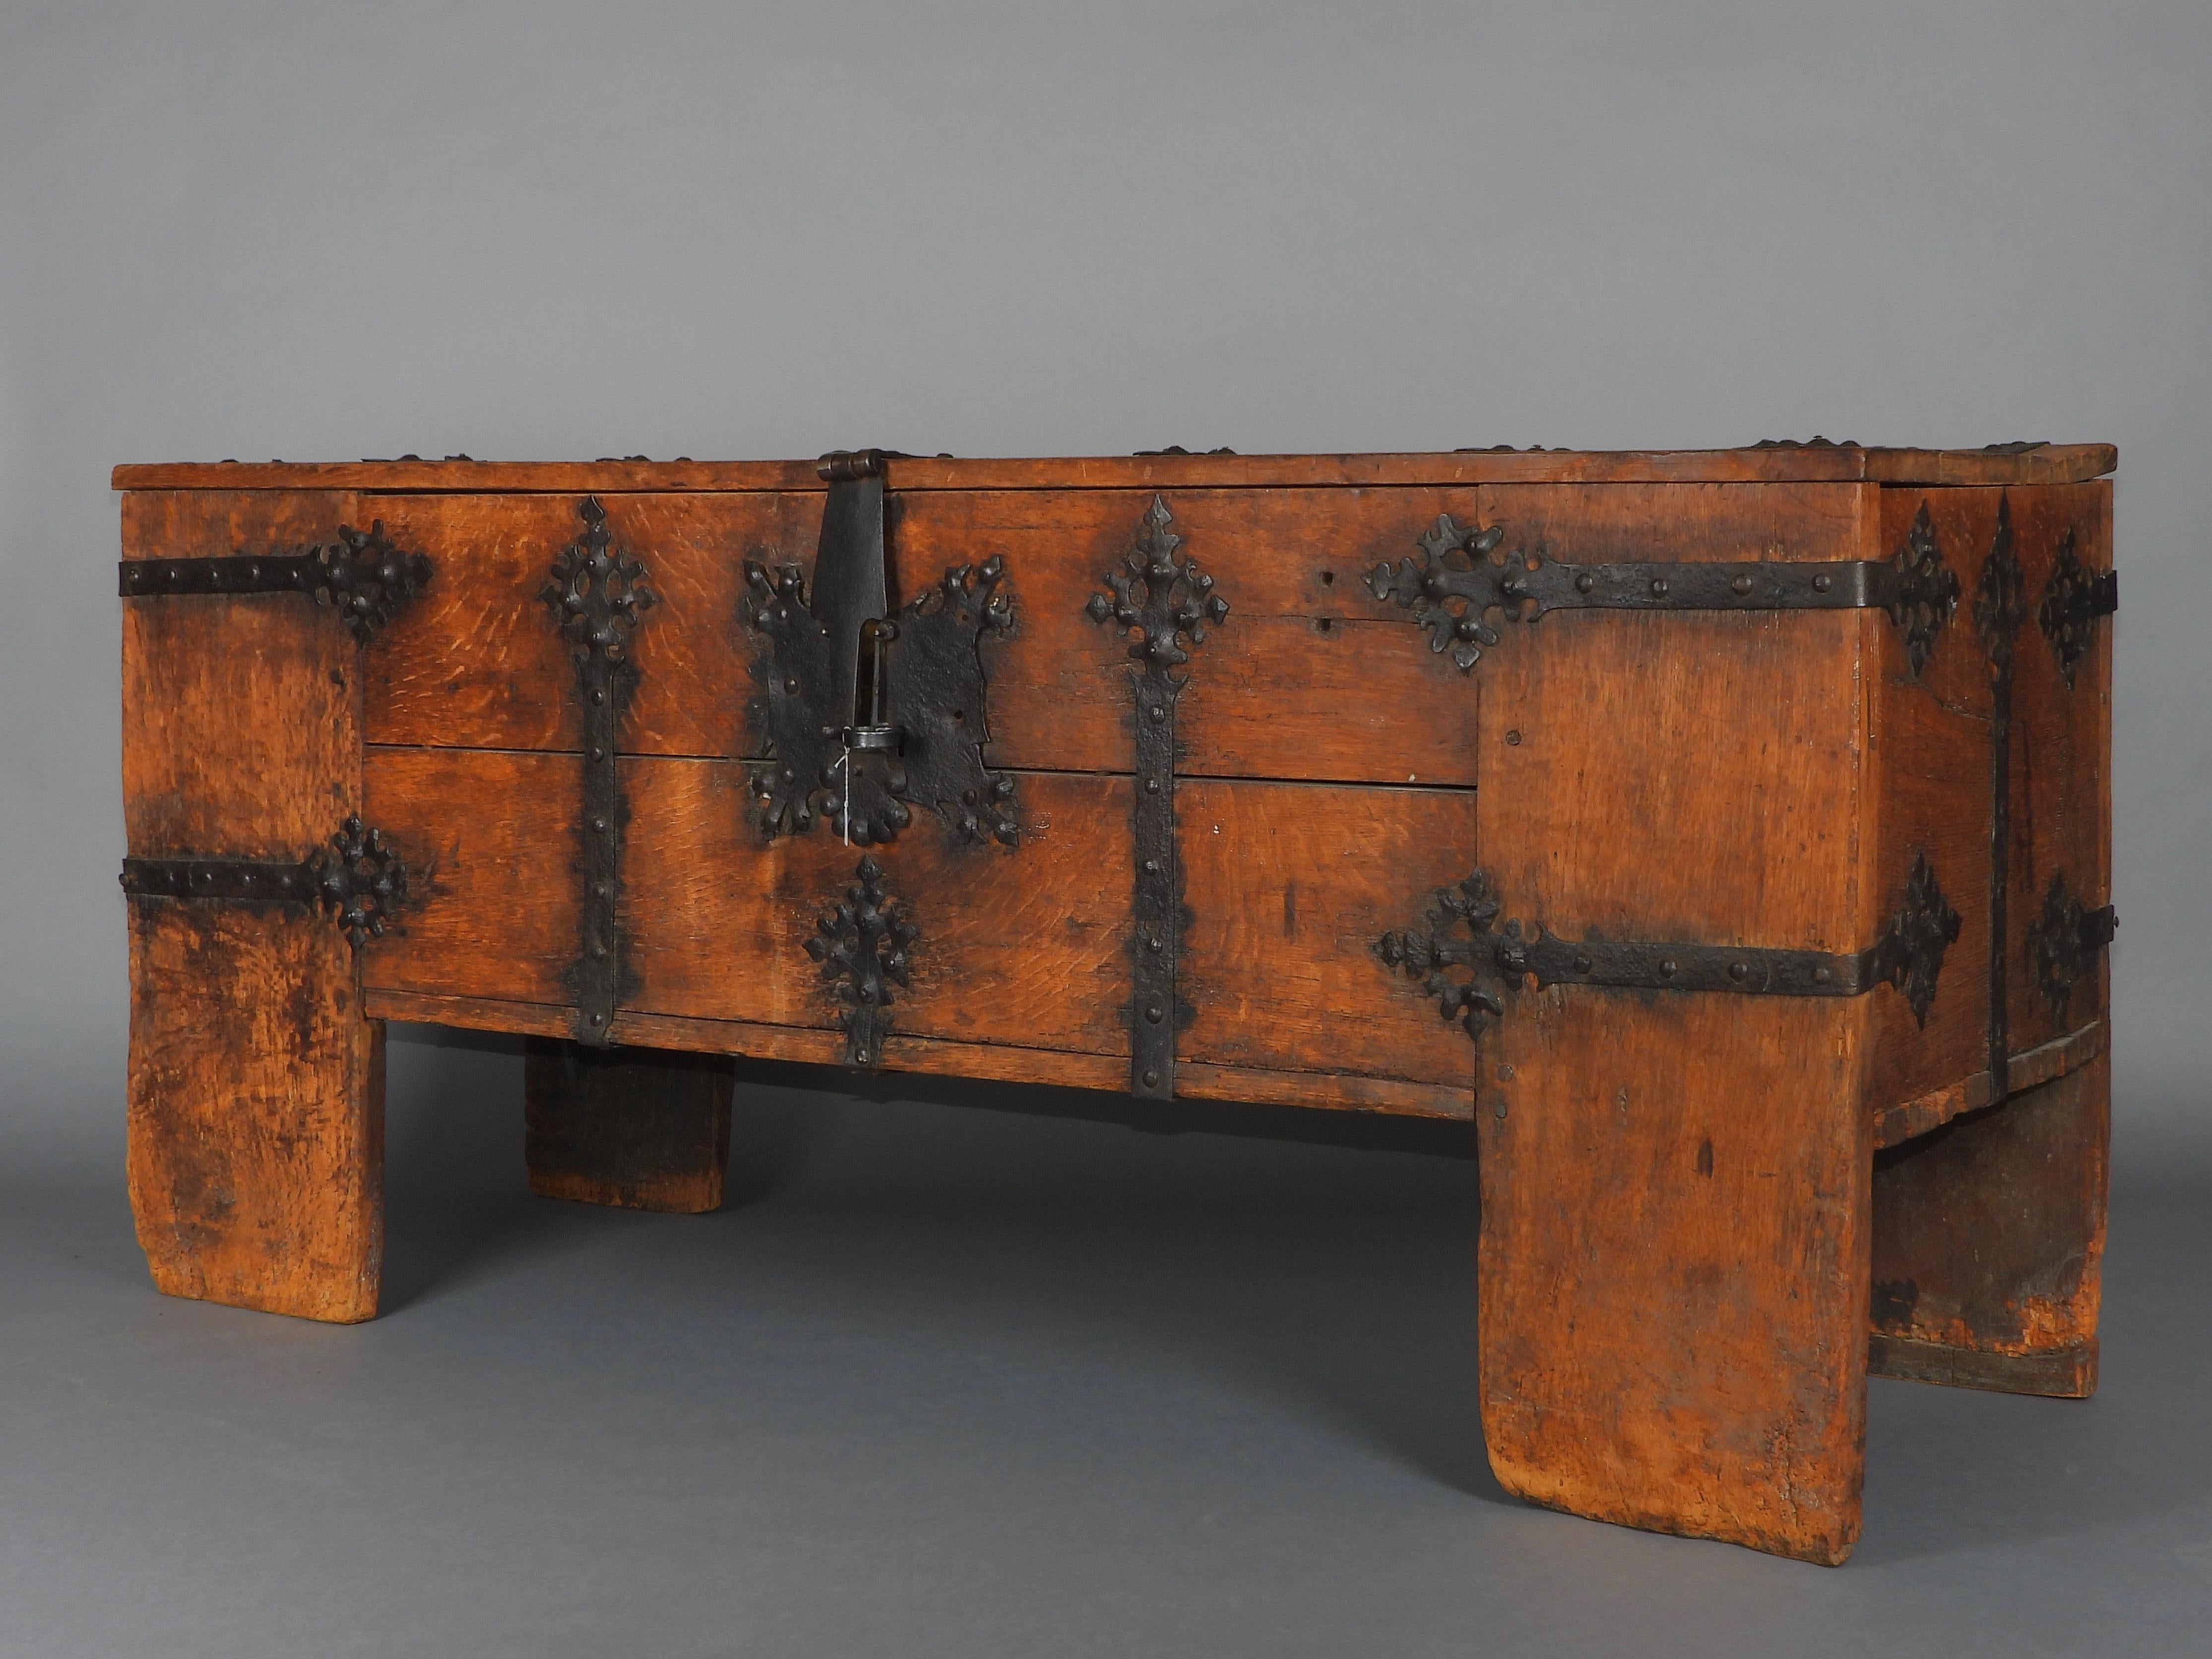 A very impressive Westphalian Gothic chest or ‚Stollentruhe’, Westphalia, Germany, circa 1500-1550. Wrought iron mounted oak, partially carved. The monumental rectangular standing chest with full-height stiles, extensively mounted with wrought